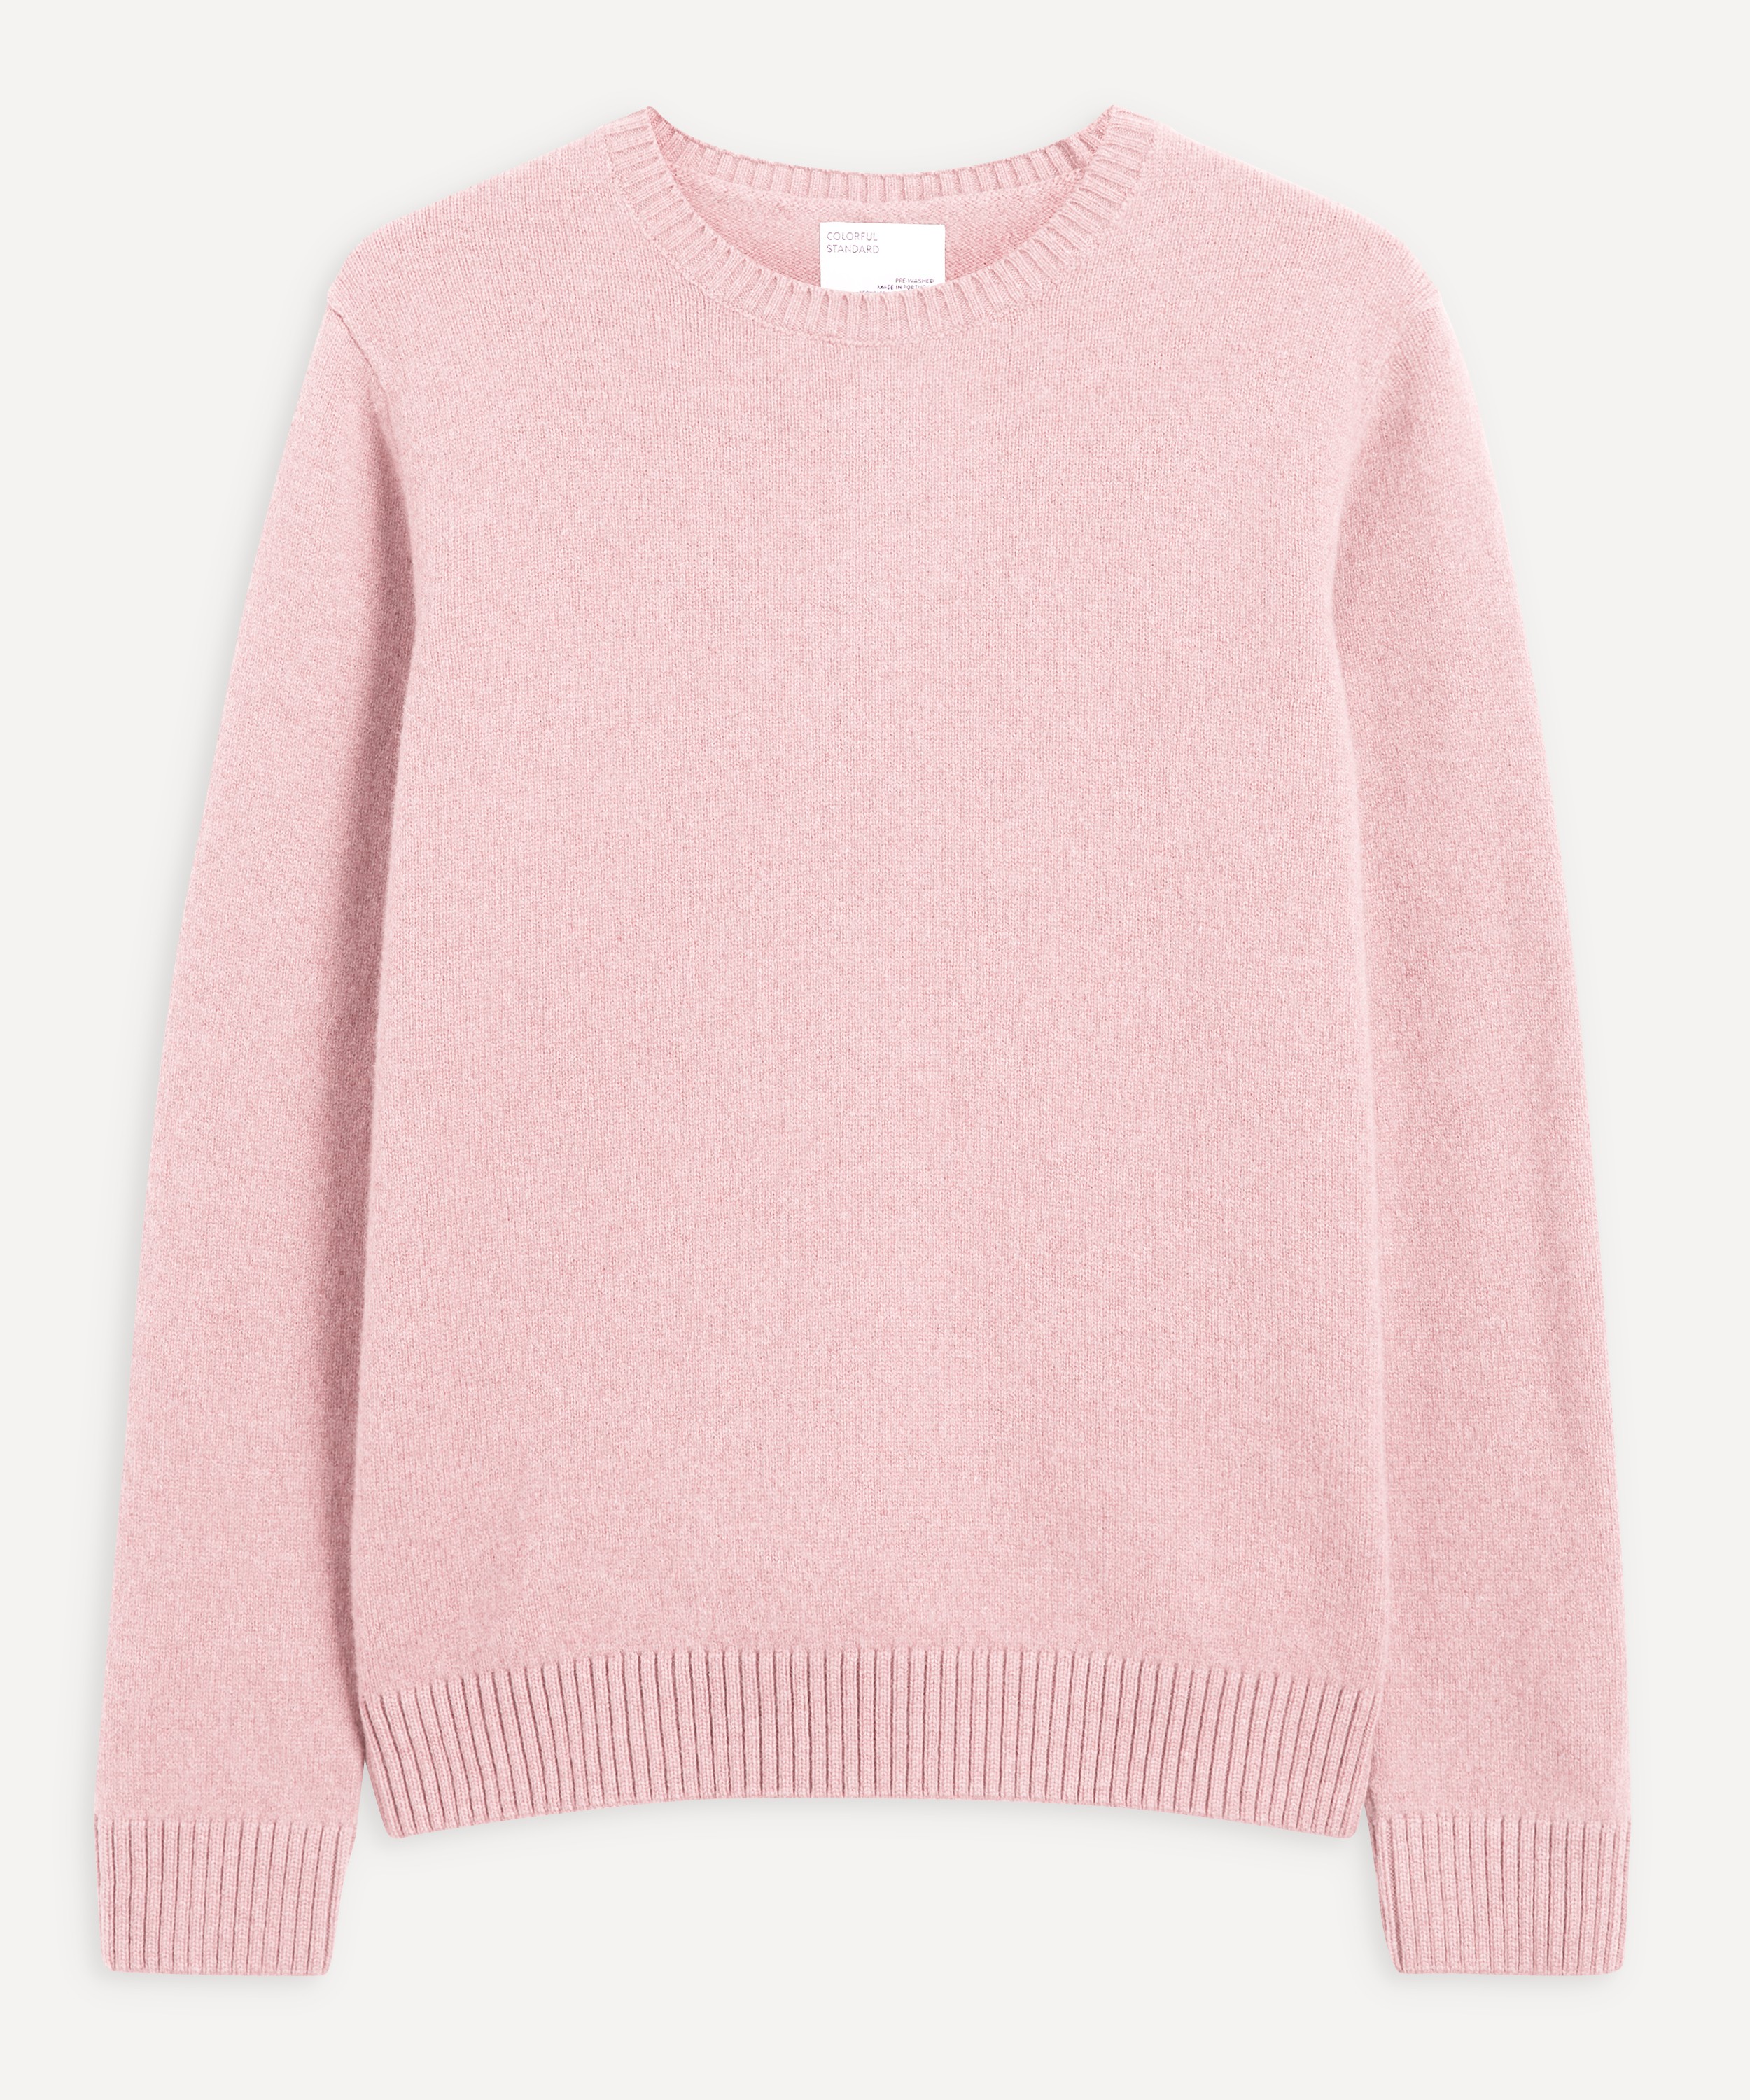 Colorful Standard - Classic Merino Wool Crew-Neck Jumper image number 0